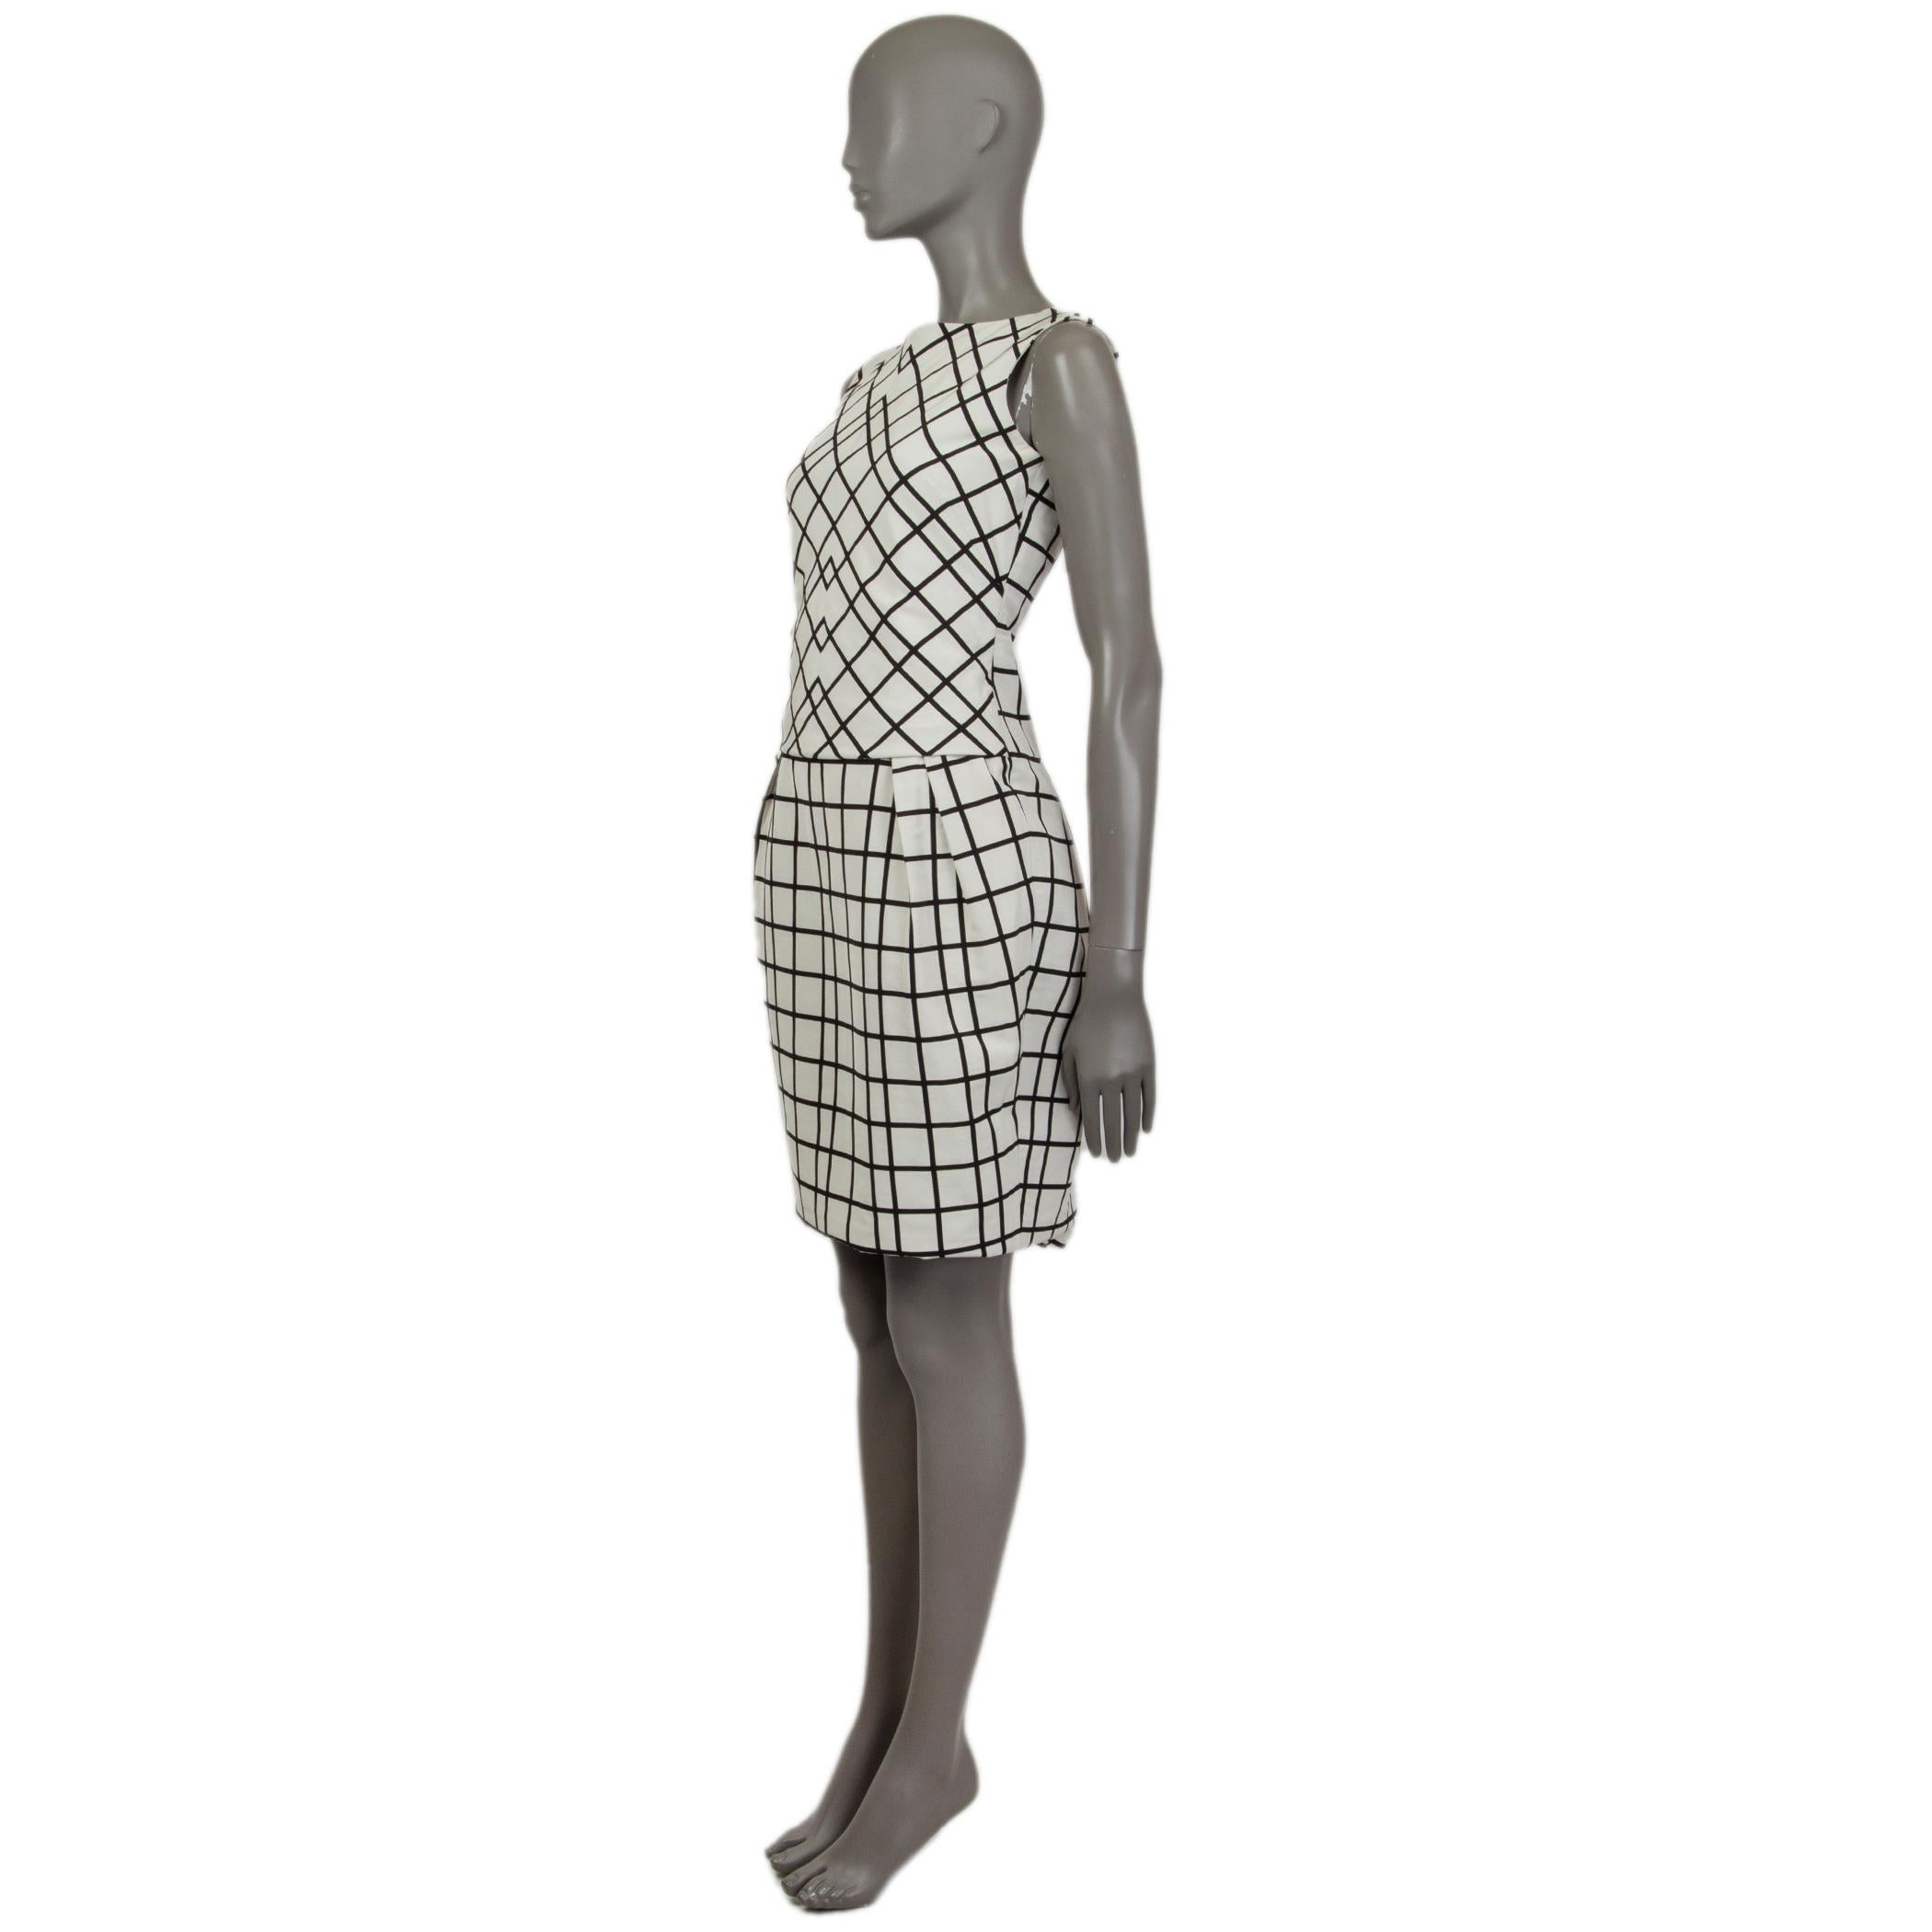 Christian Dior sleeveless plaid sheath dress in black and white cotton (69%) and polyester (31%). With round neck, pleated sides on front and back. Hooks from the top back, closes with invisable zipper in the back. Slit on the back bottom. Lined at